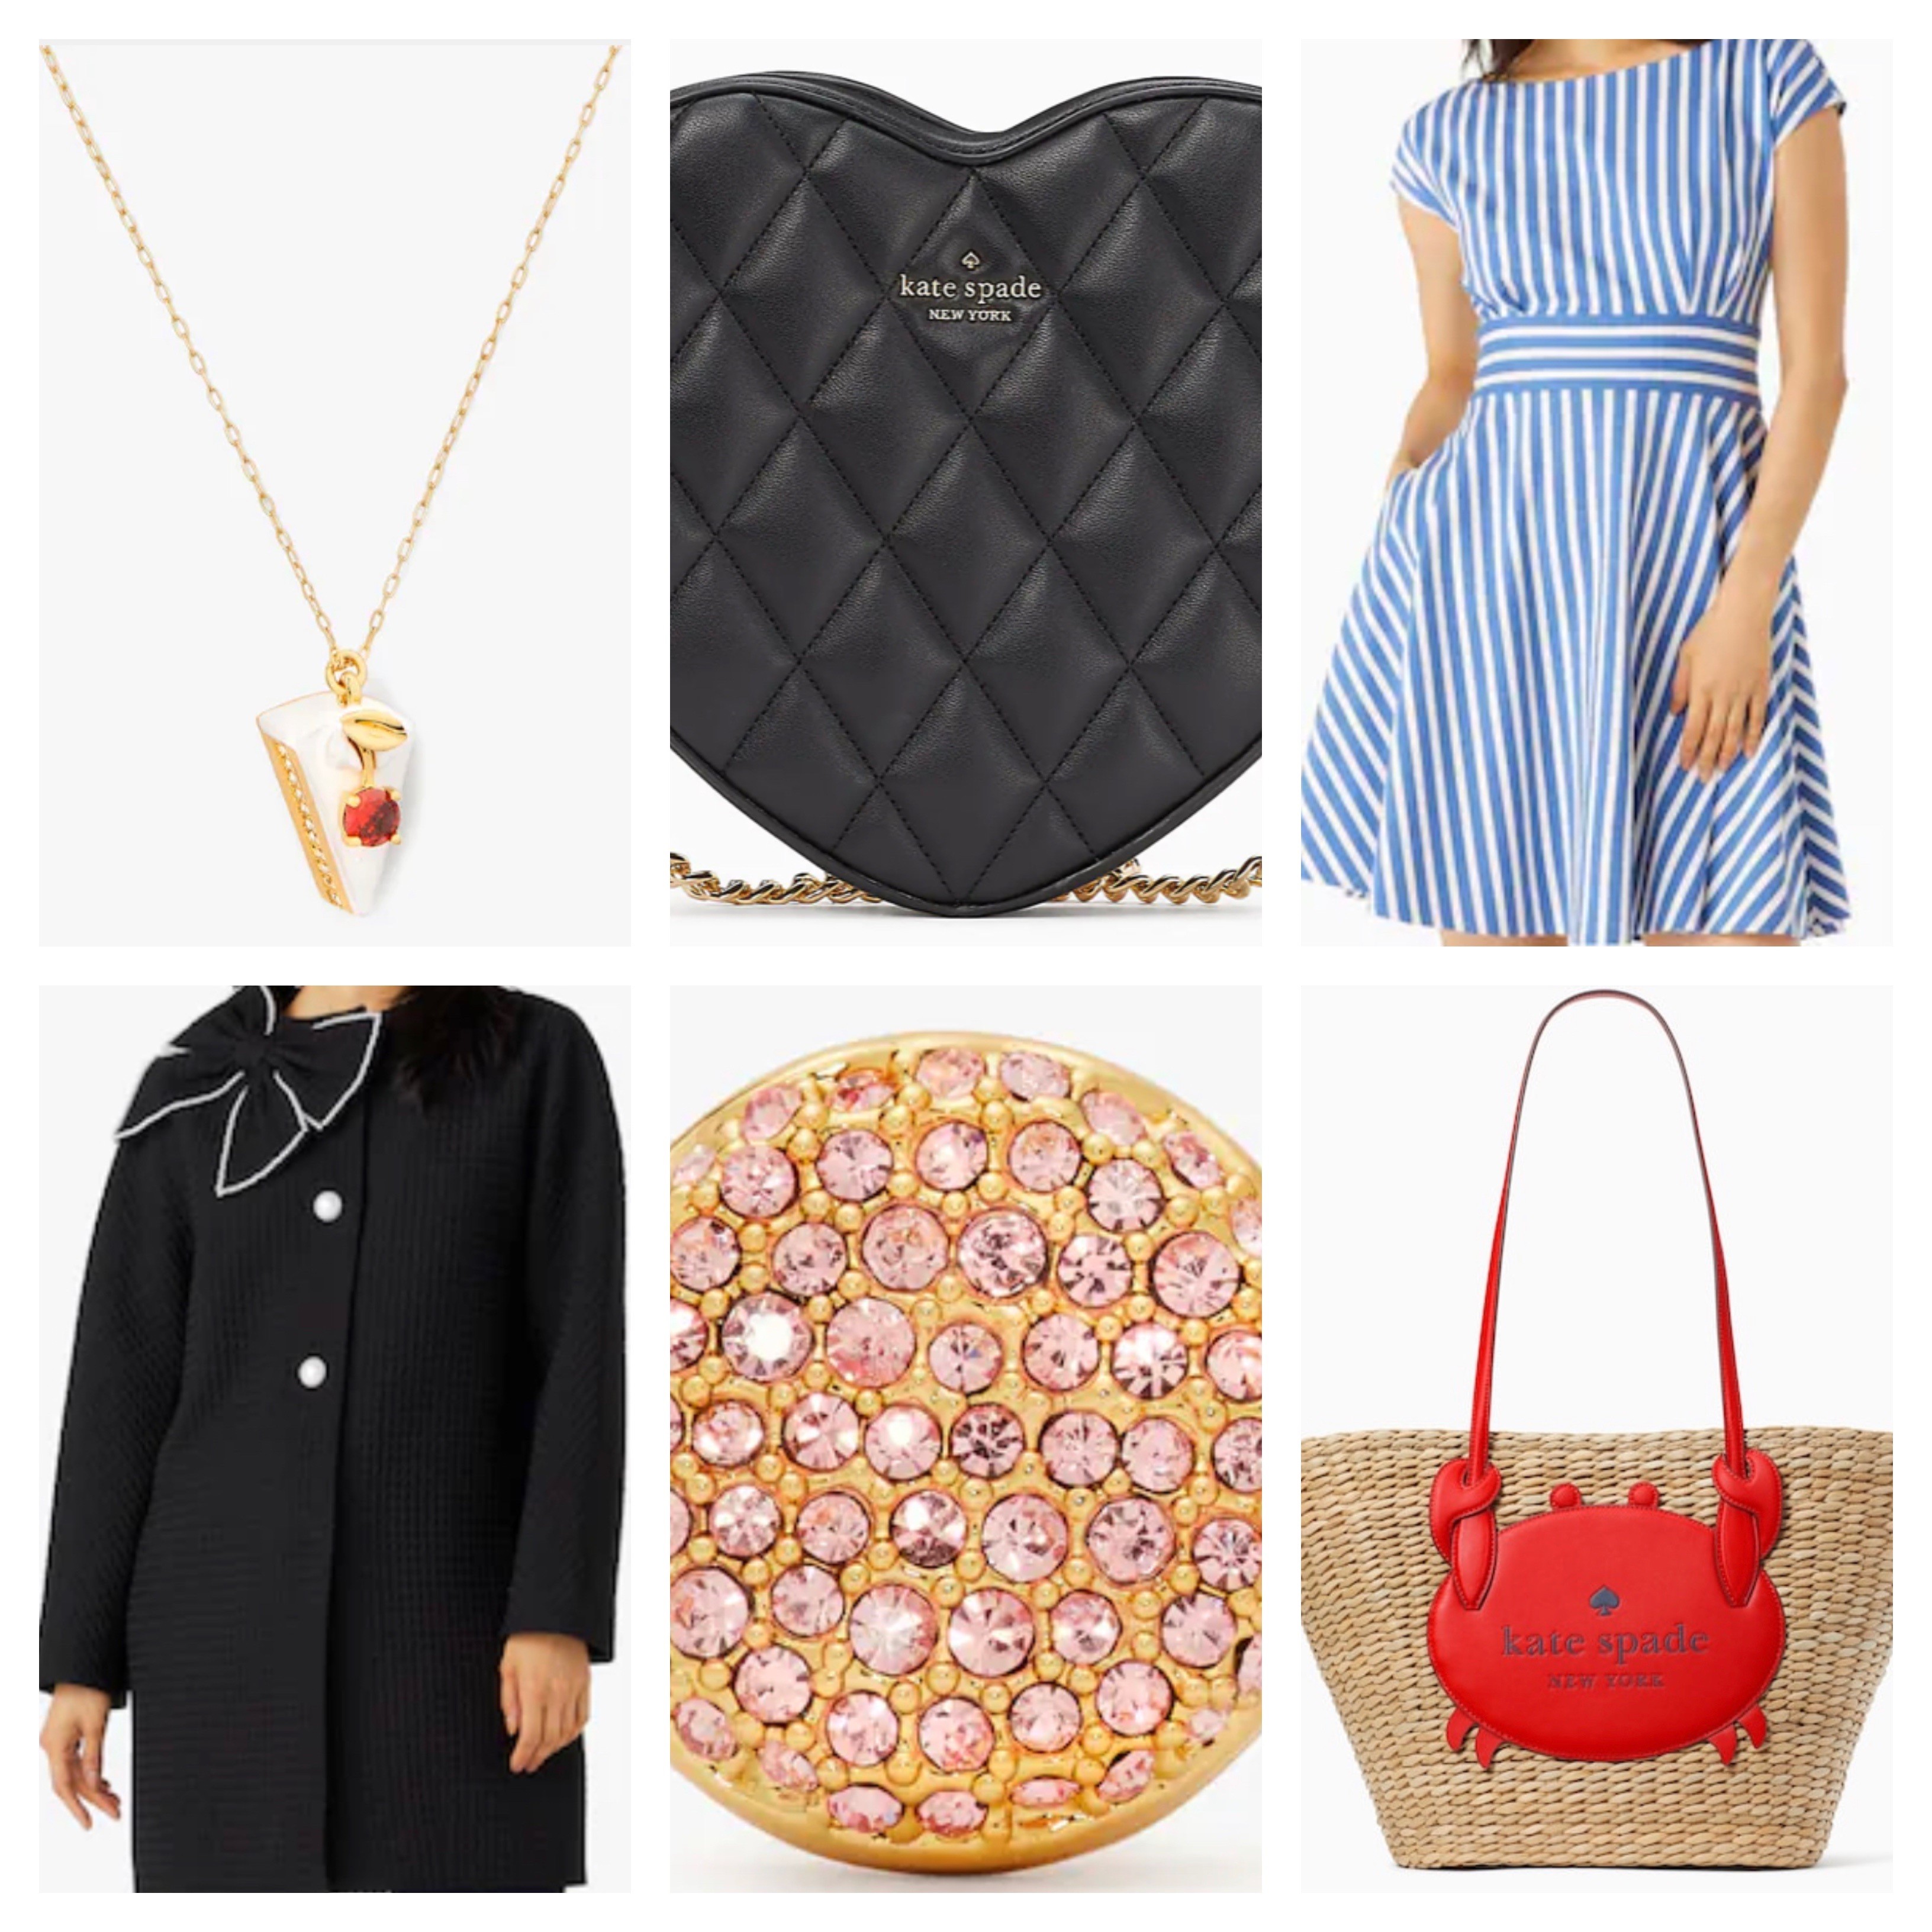 Kate Spade Surprise sale: Up to 60% off everything, plus extra 20% off  select styles 